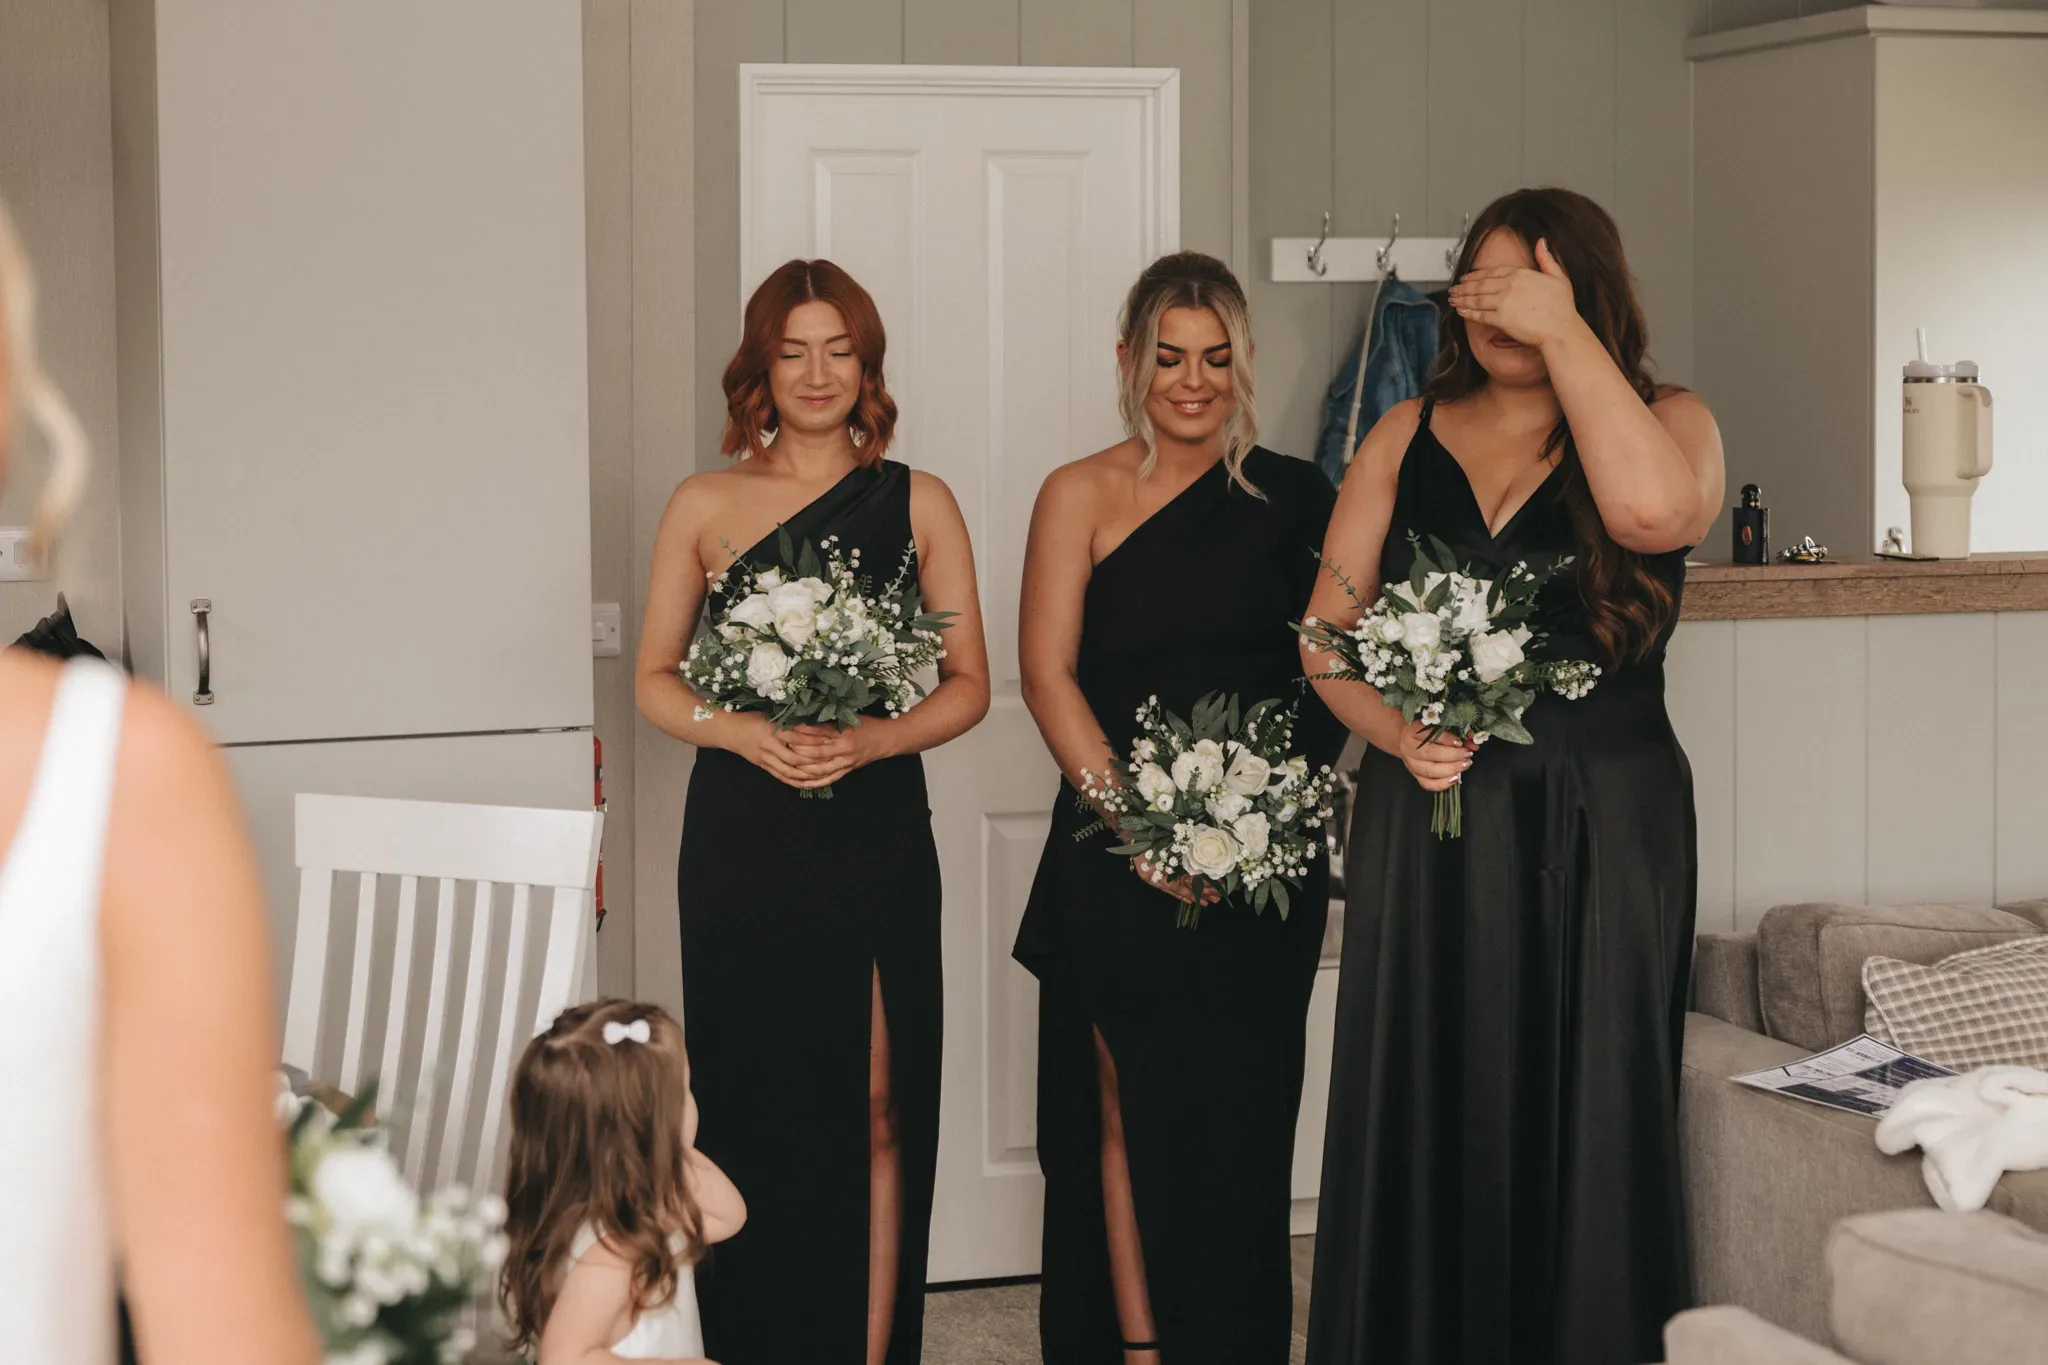 Three bridesmaids in black dresses hold bouquets, standing in a room with modern decor. the bridesmaid on the right covers her face, possibly emotional, while the others smile gently.